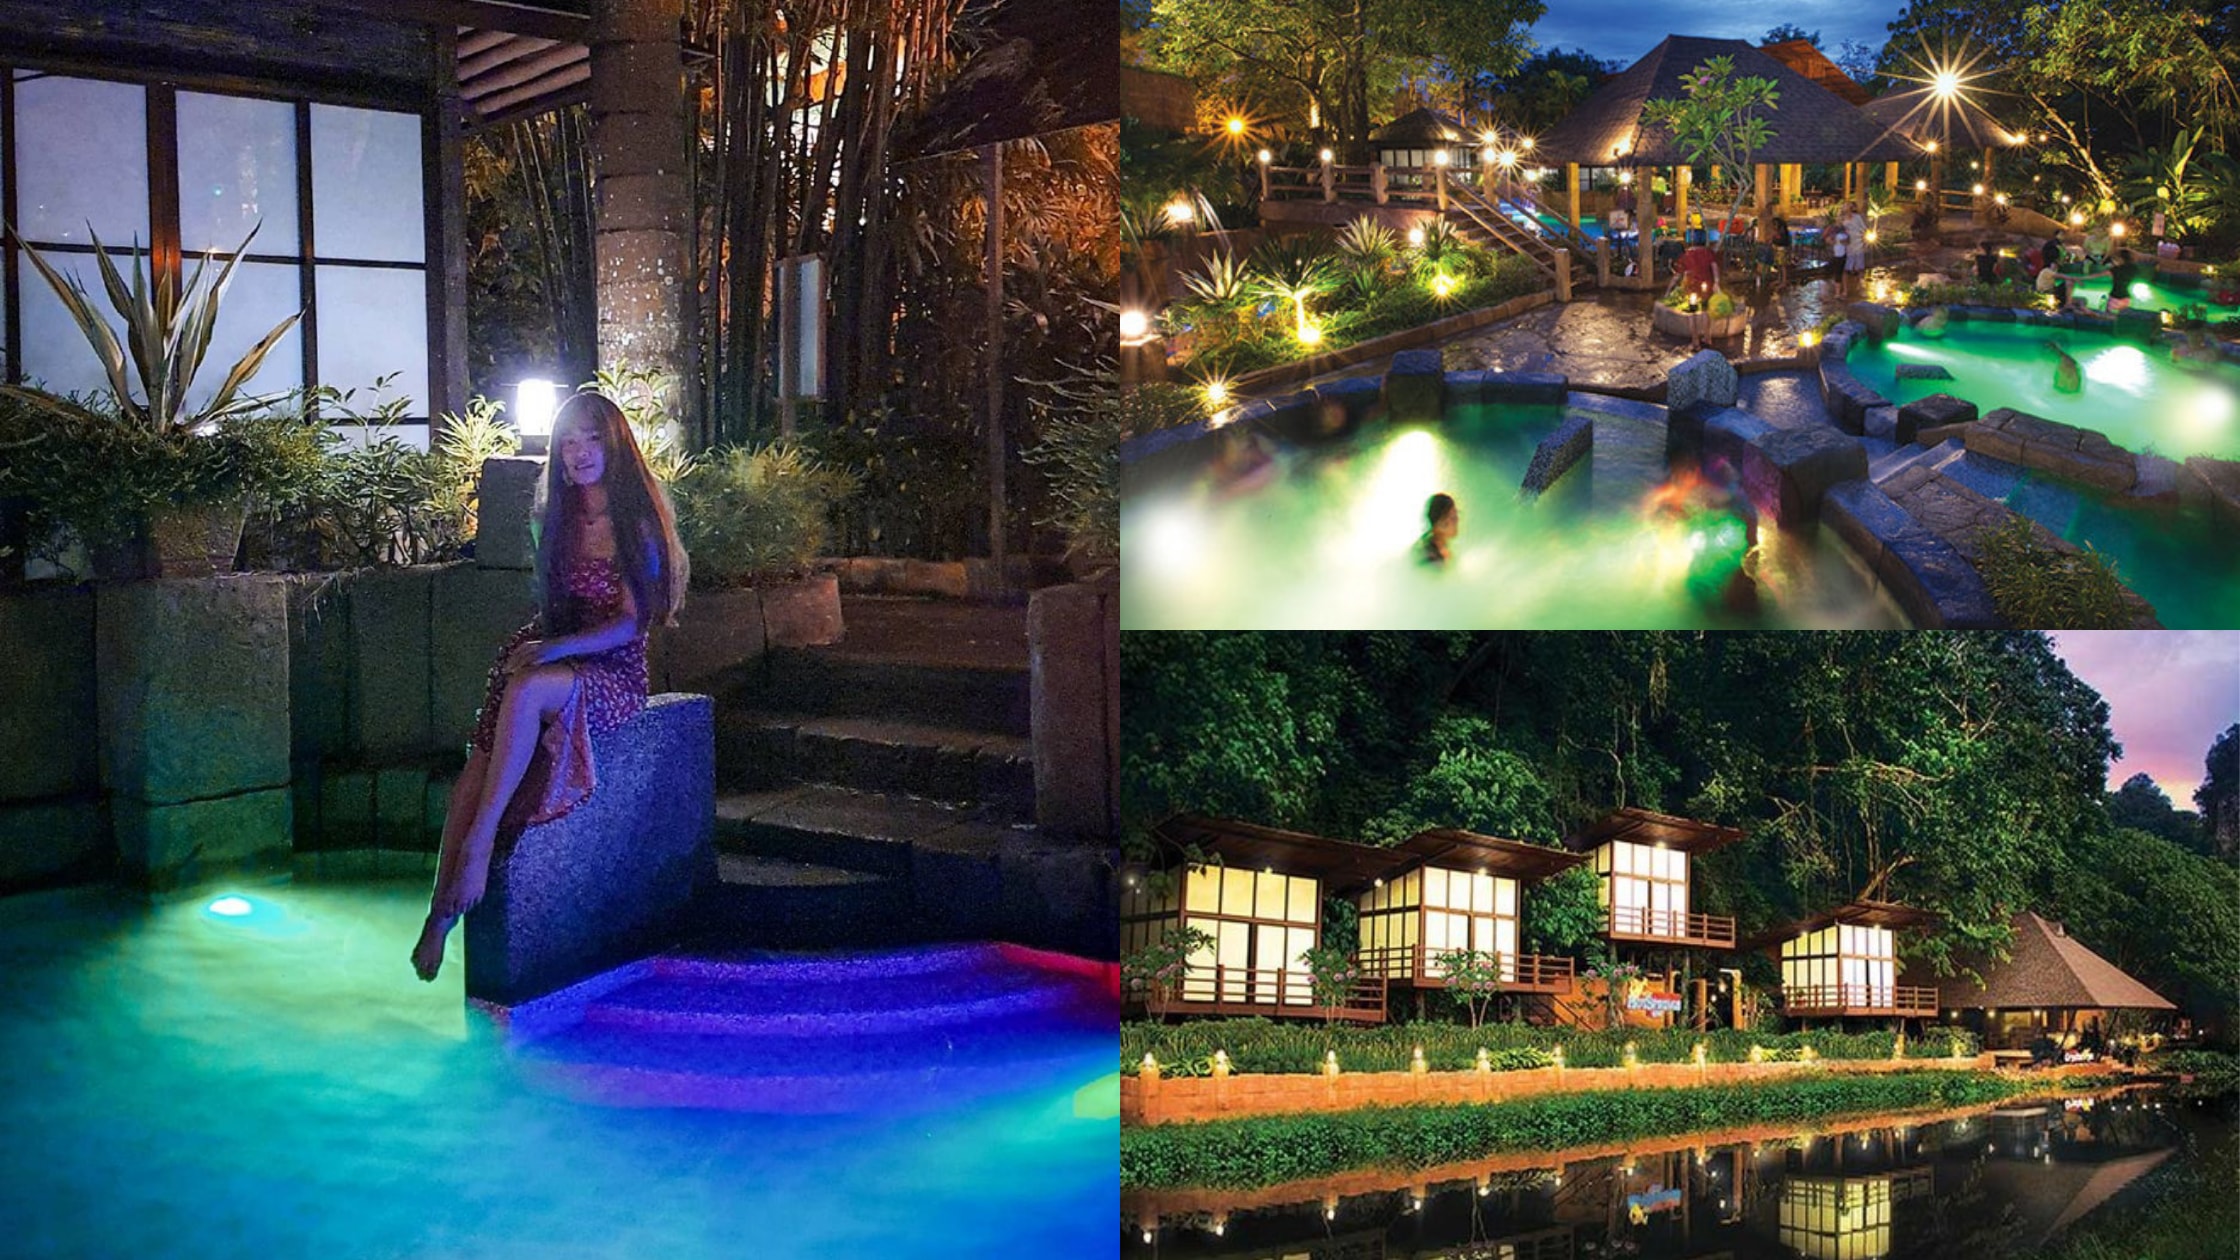 Lost World Of Tambun Hot Spring : Goodyfoodies 12 Awesome Things To Do